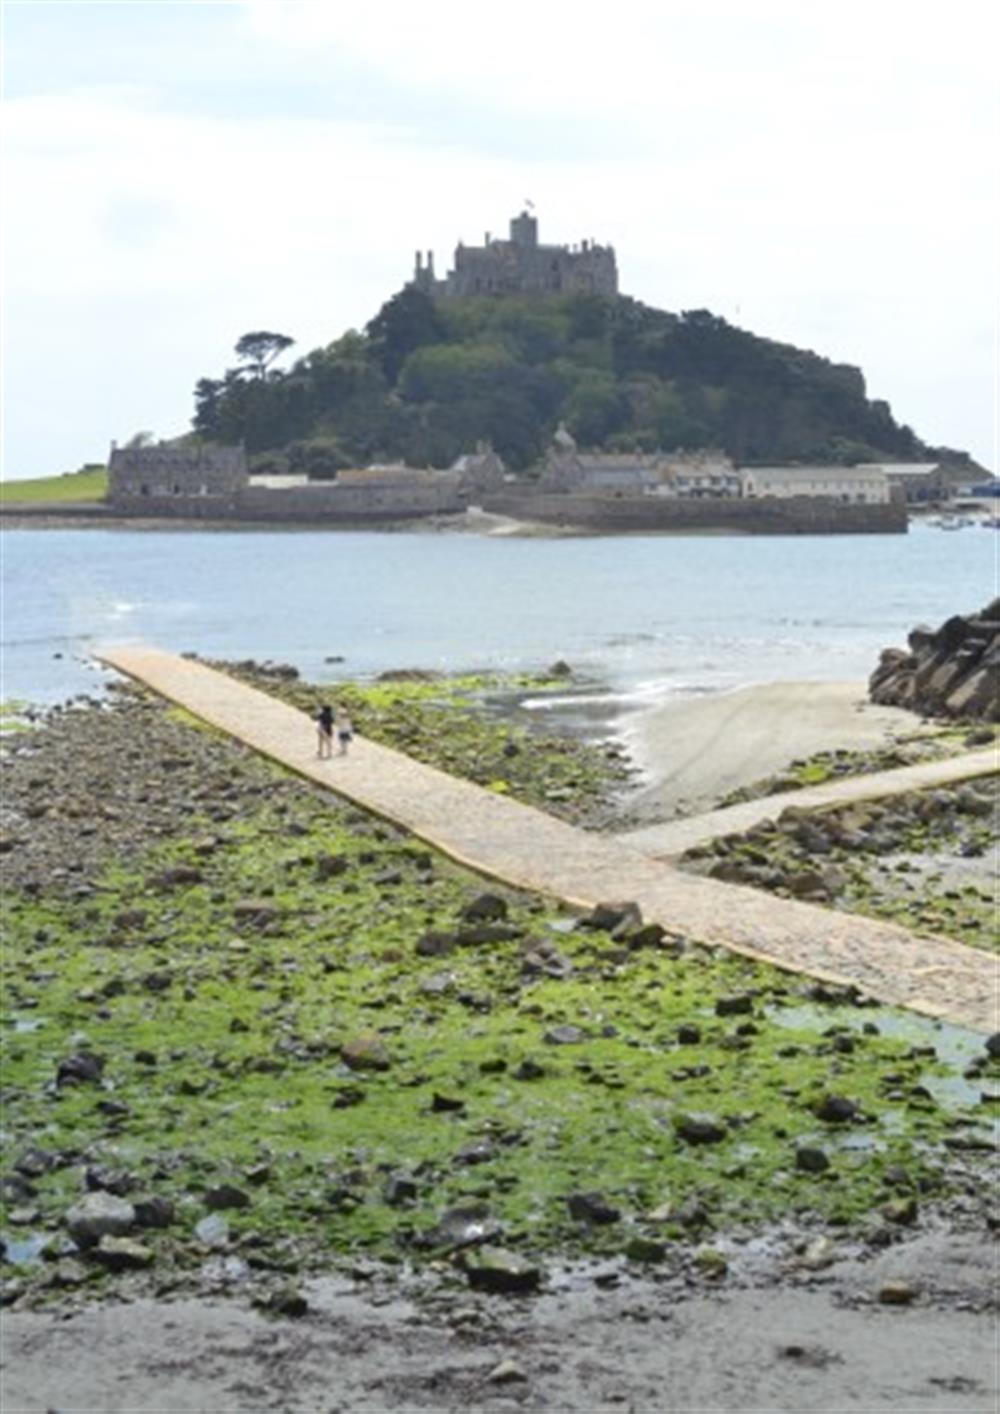 St Michael's Mount is 45 minutes away - cross the causeway by foot (if the tide is out!) or catch the water-taxi across to the island. at Pirates Den in Helford Passage